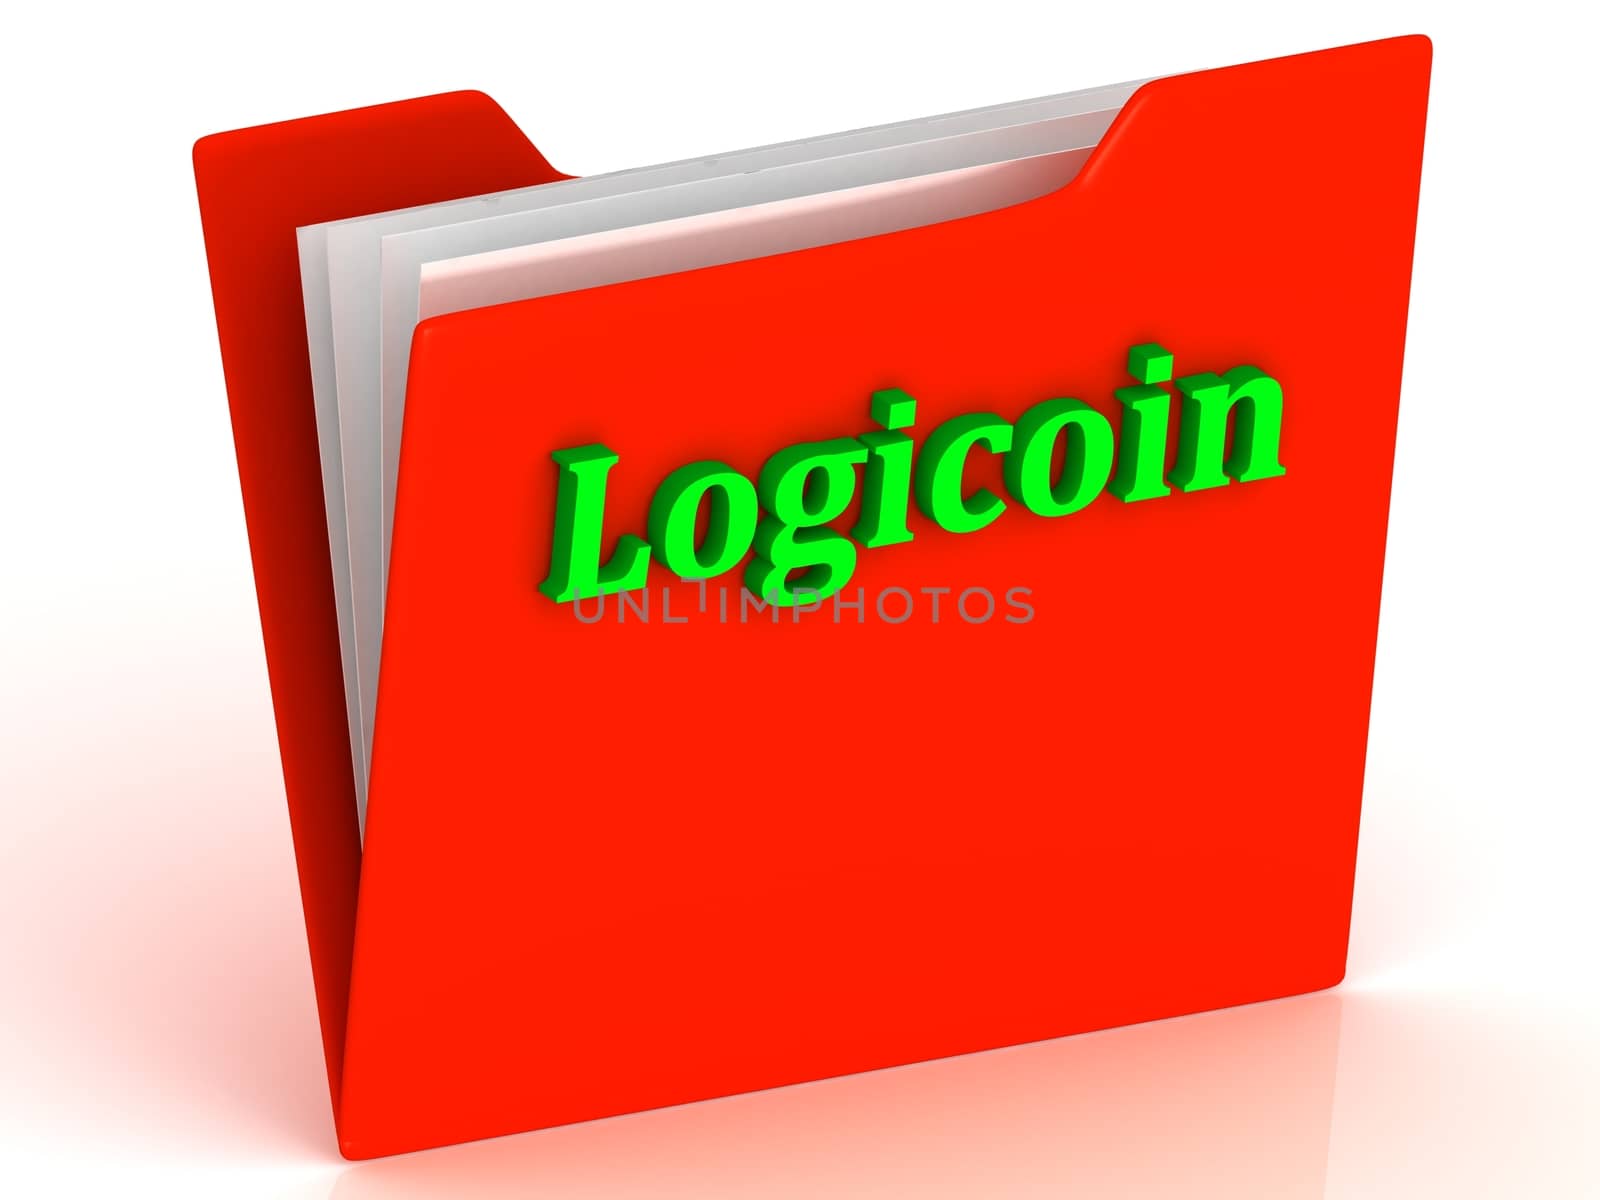 Logicoin- bright green letters on red paperwork folder witch paper list on a white background